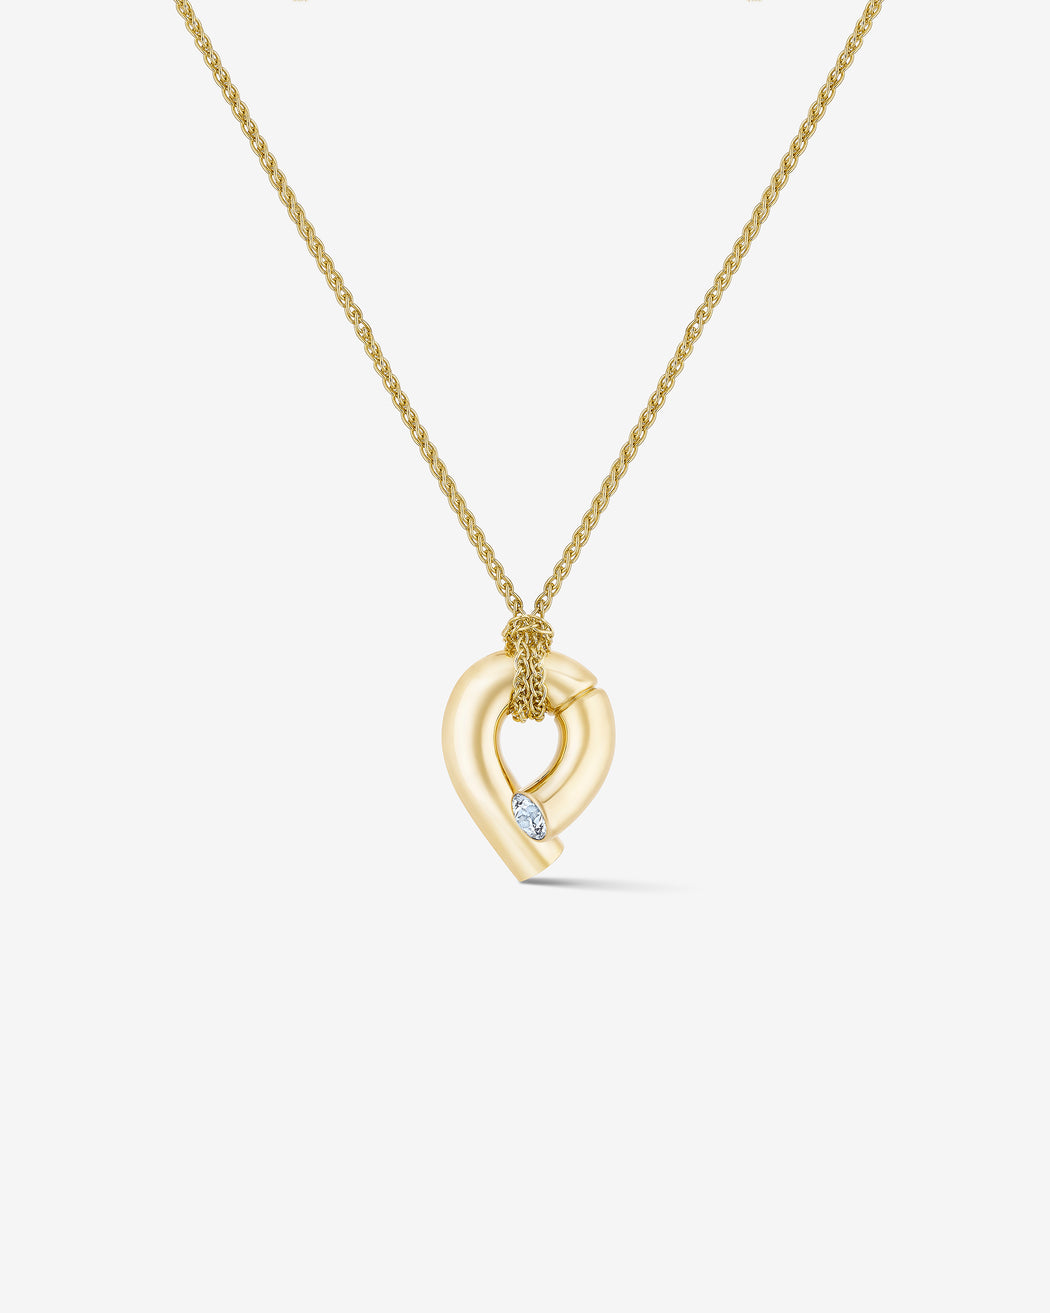 Oera pendant 18k Fairmined yellow gold and diamond, Tabayer ethical fine jewelry